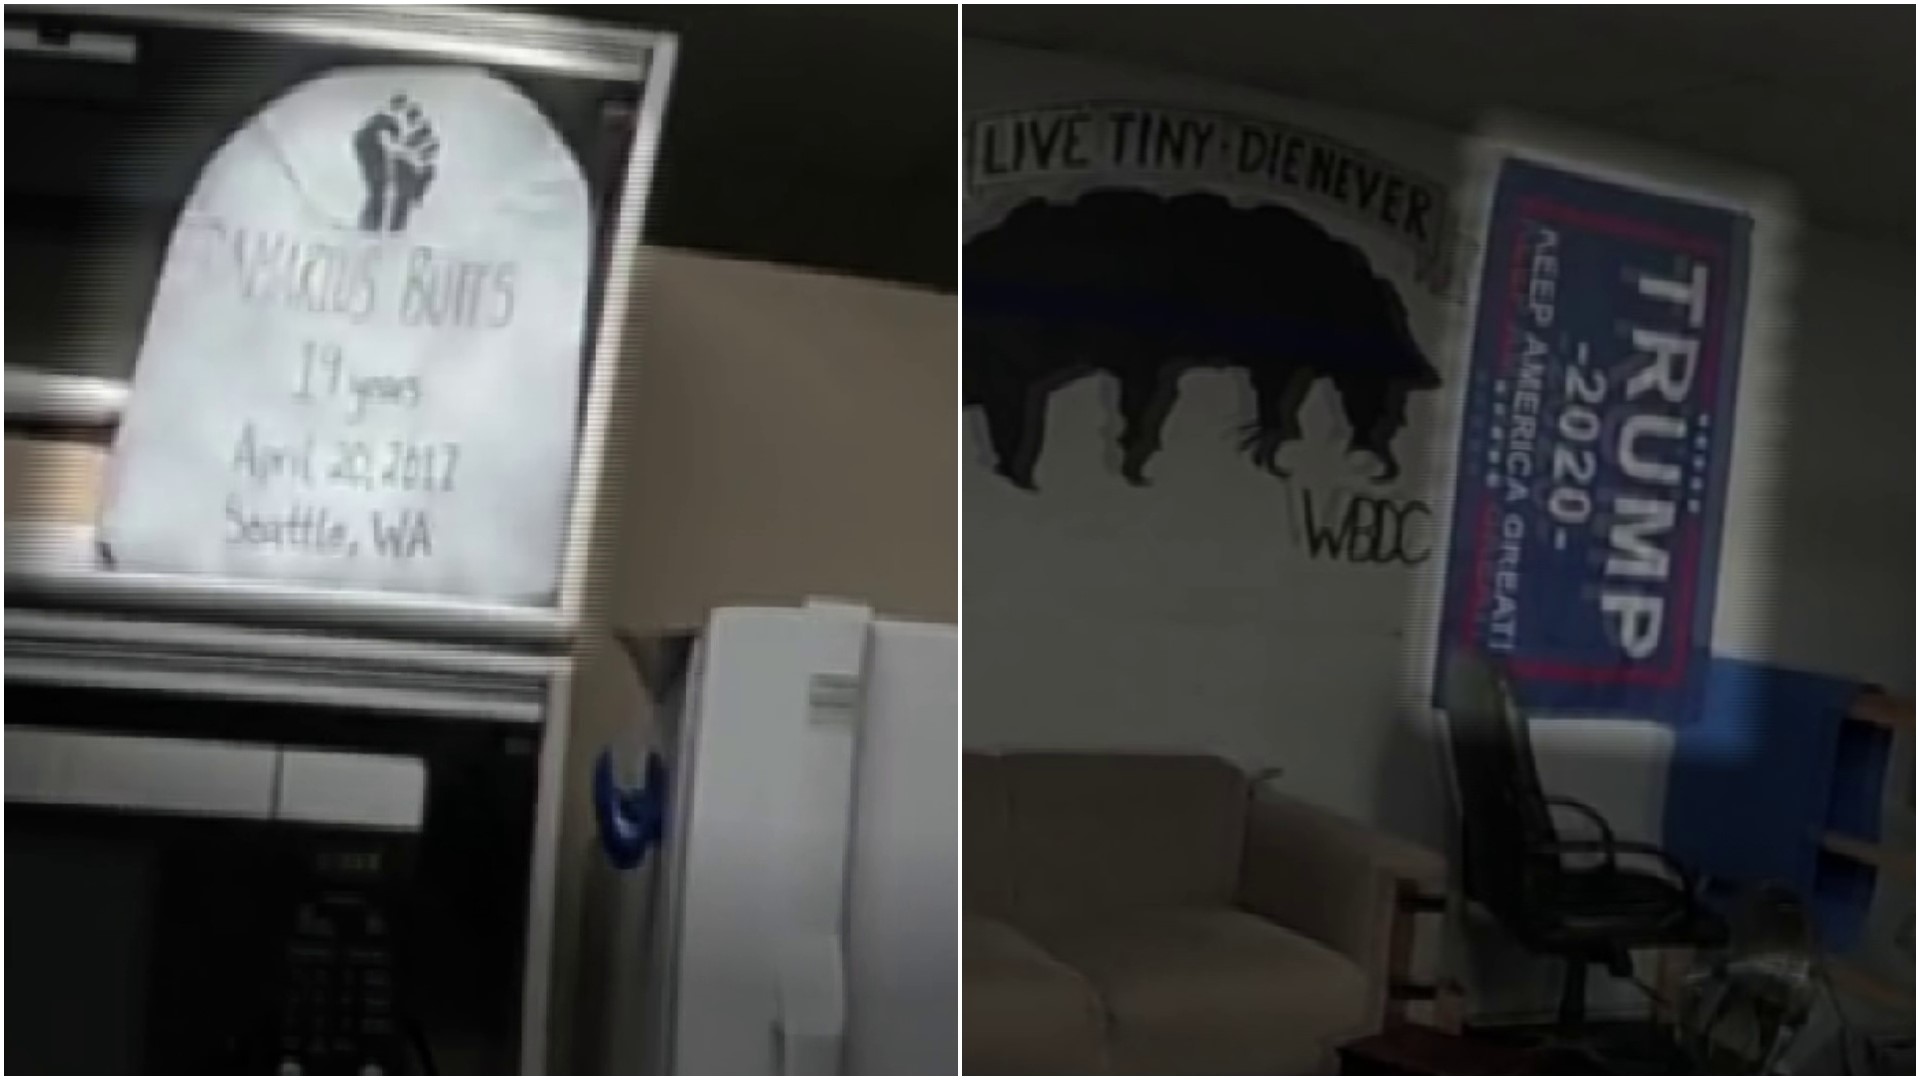 The Seattle Office of Police Accountability is investigating after body camera footage revealed "inappropriate" items displayed in the East Precinct break room.